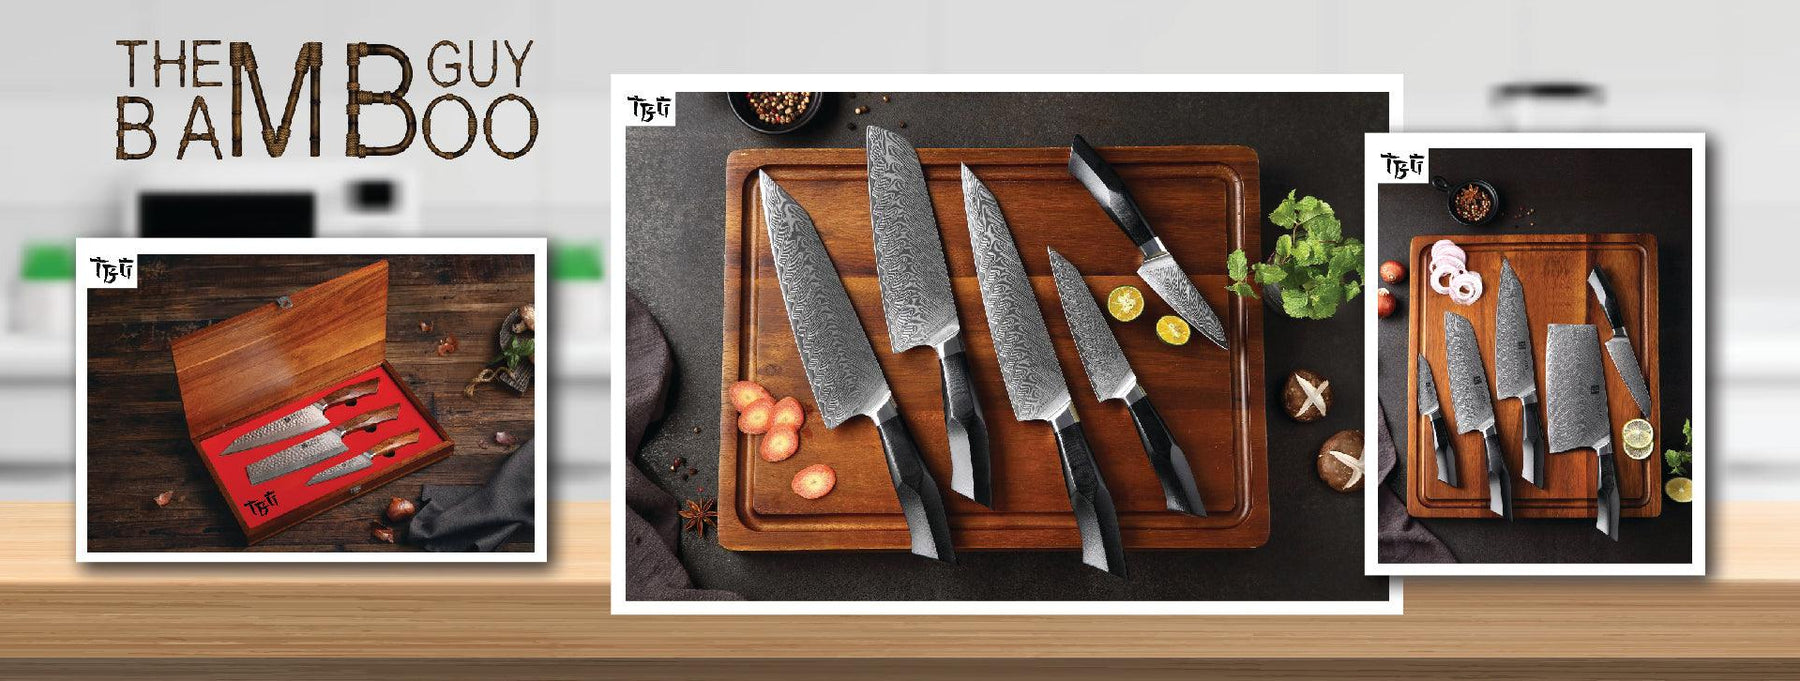 Best Kitchen Knives - The Bamboo Guy